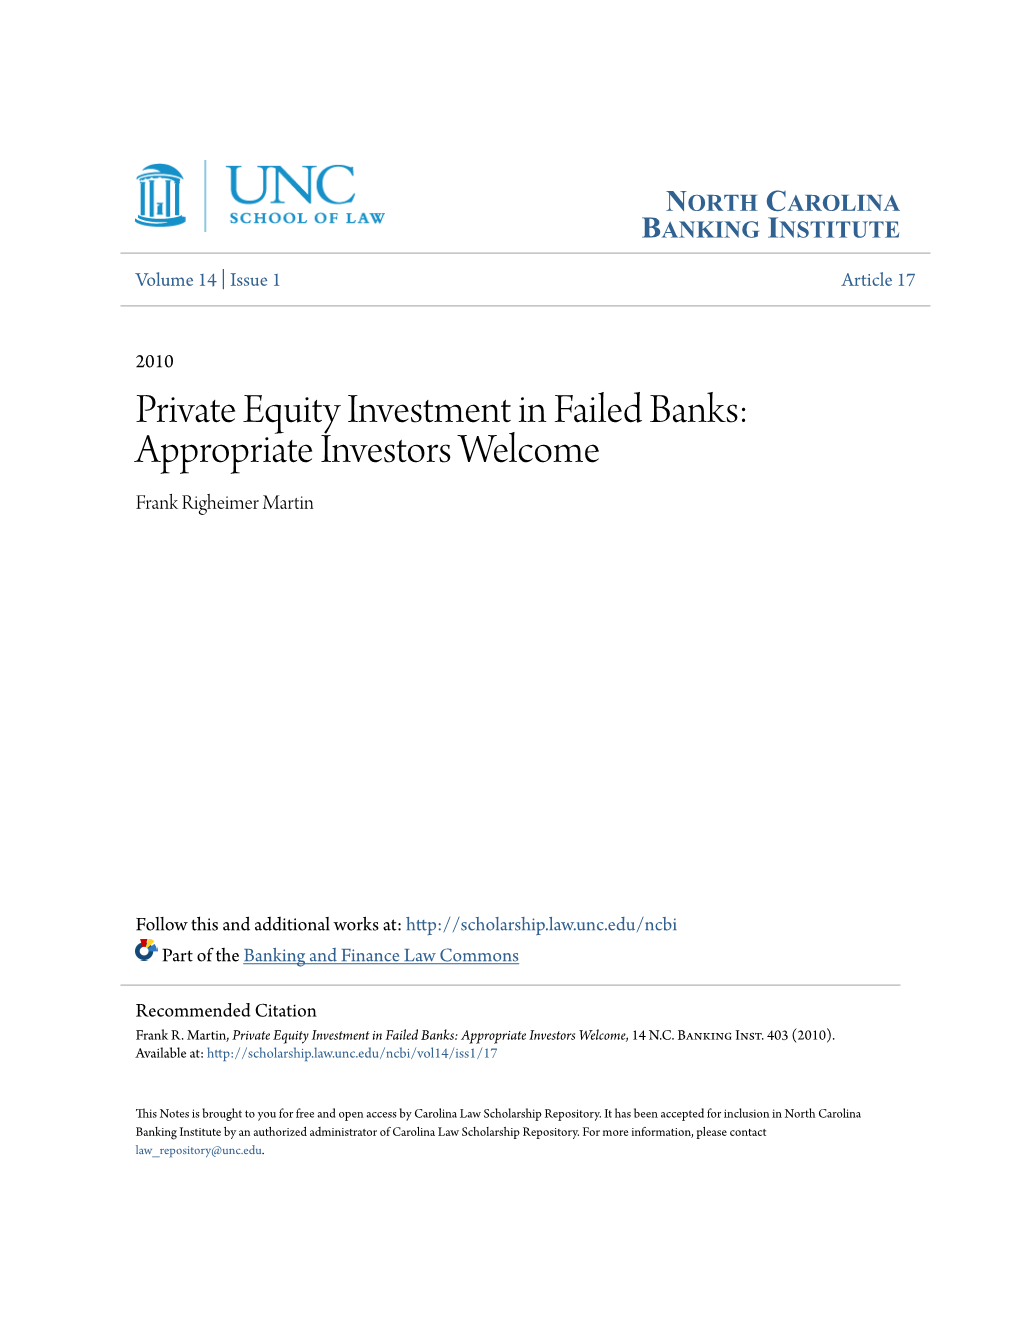 Private Equity Investment in Failed Banks: Appropriate Investors Welcome Frank Righeimer Martin